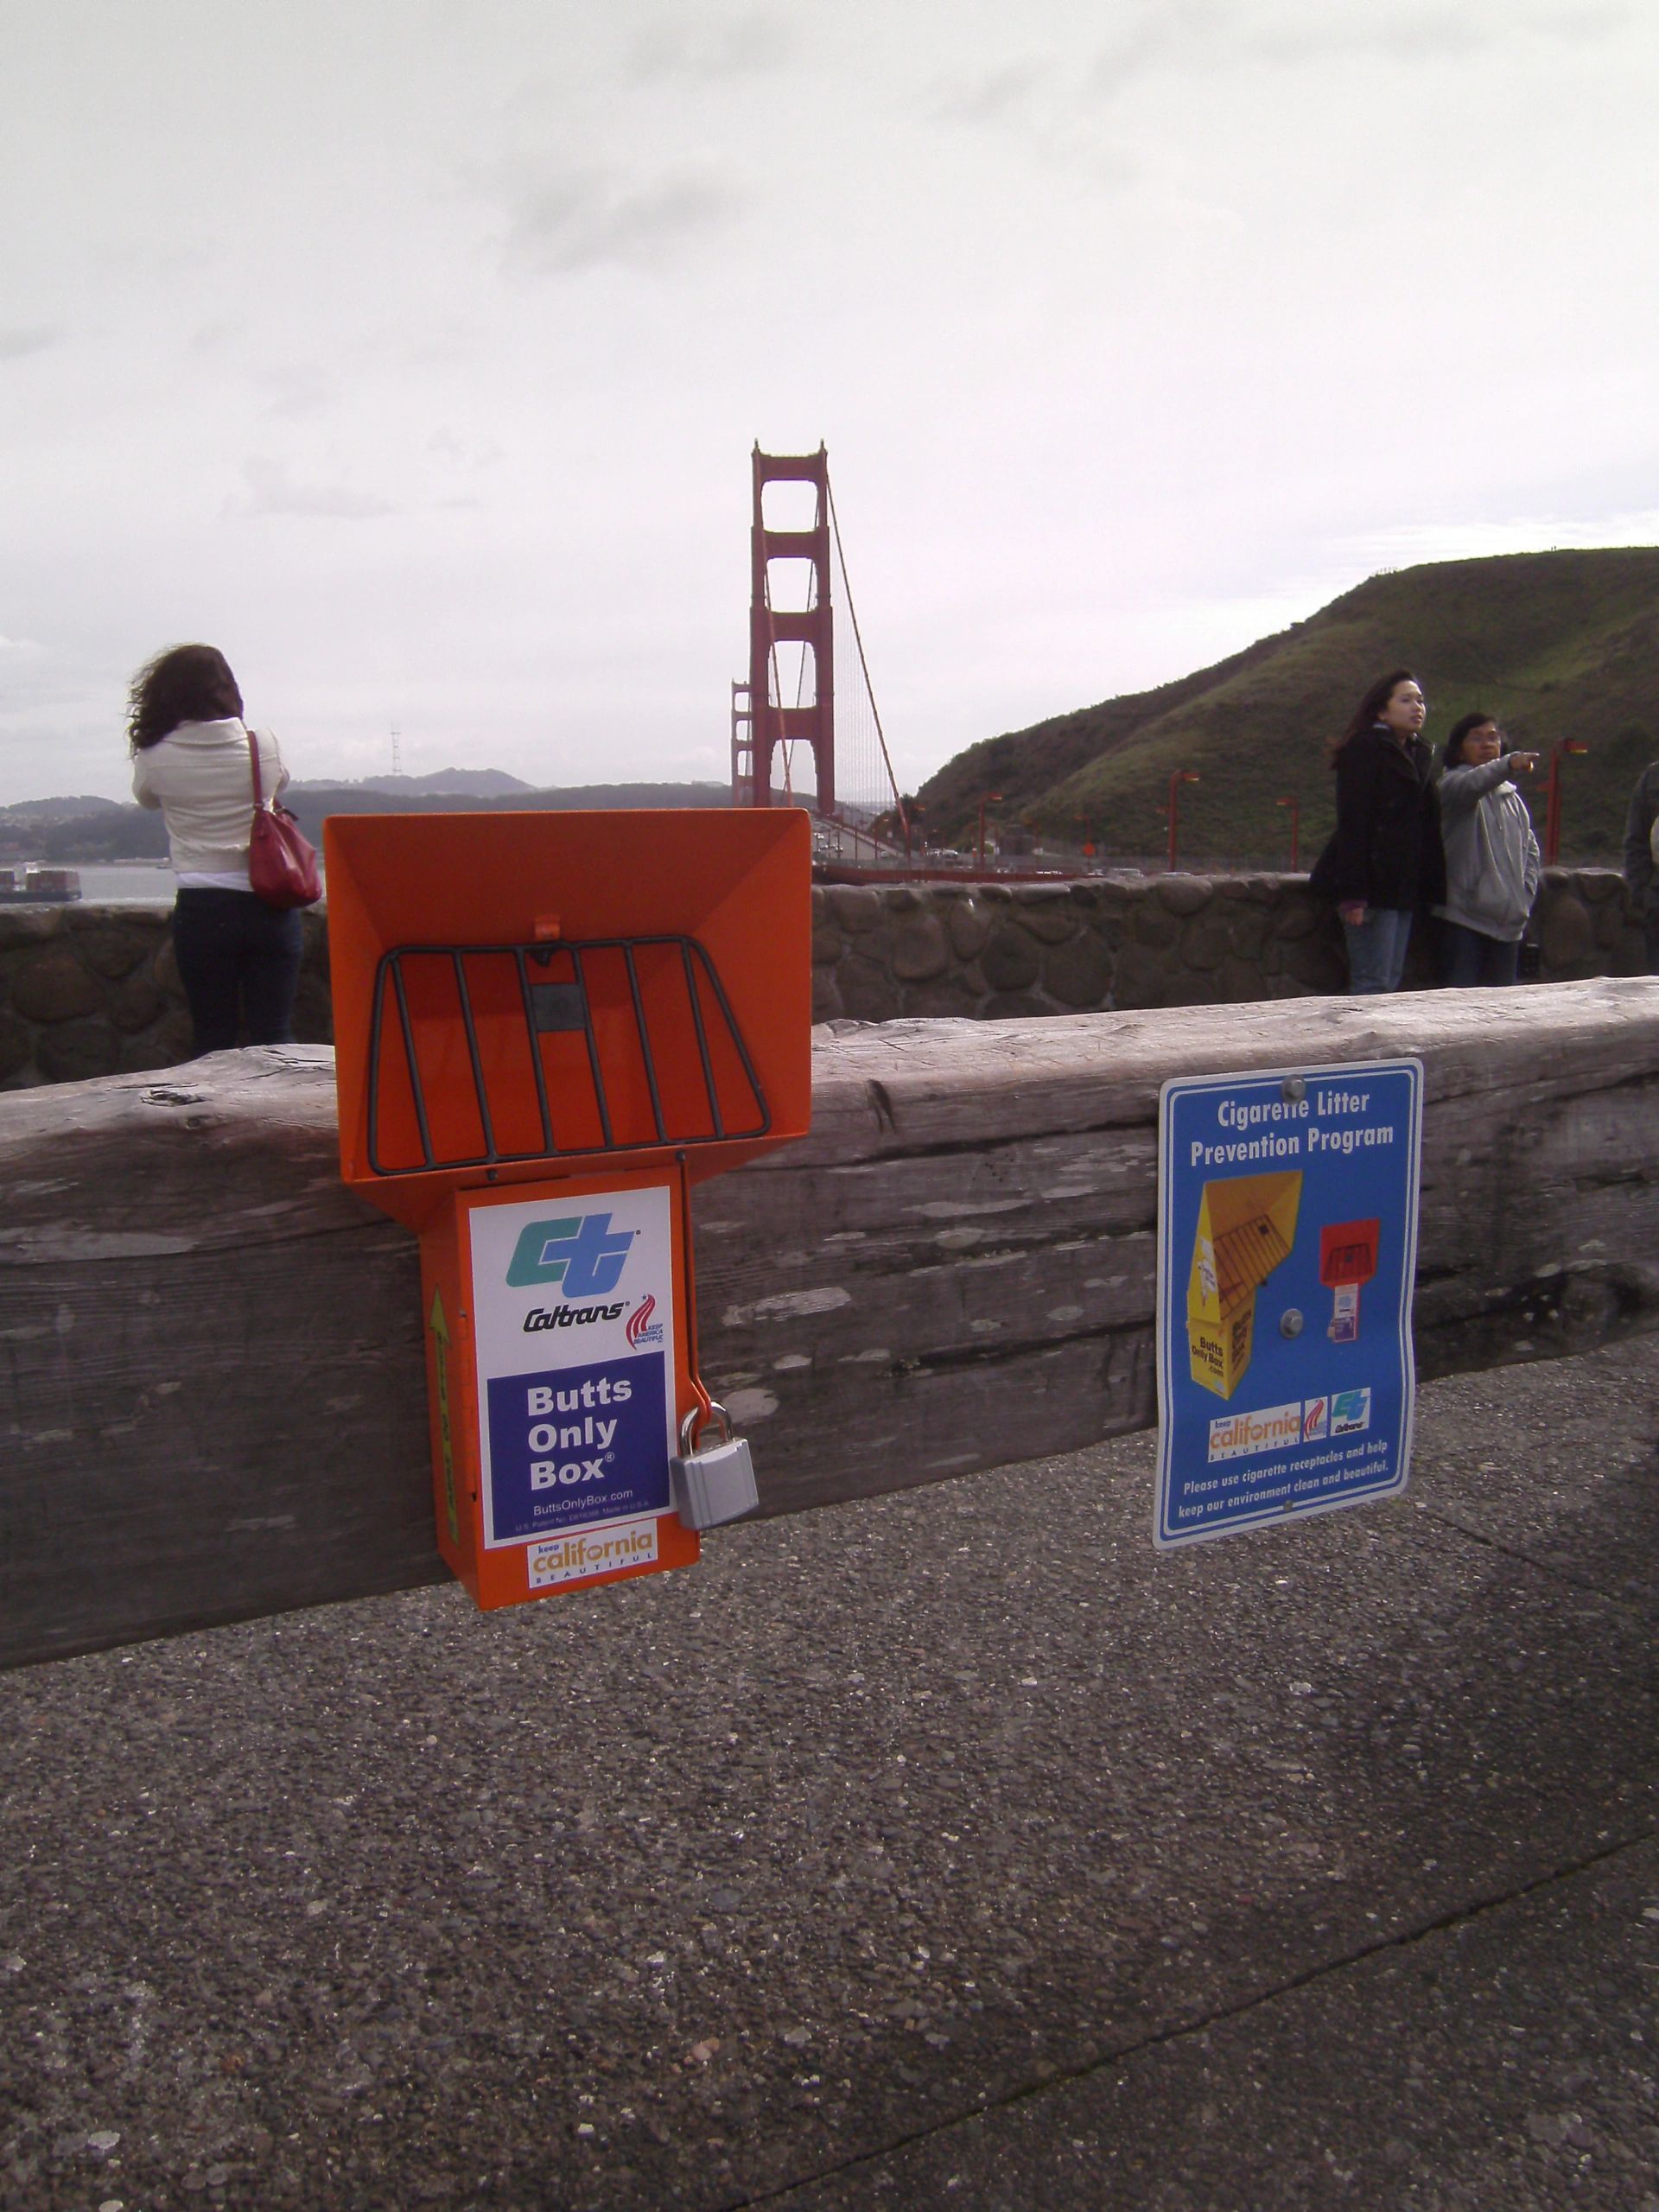 Butts Only Box® at Golden Gate Bridge rest area.